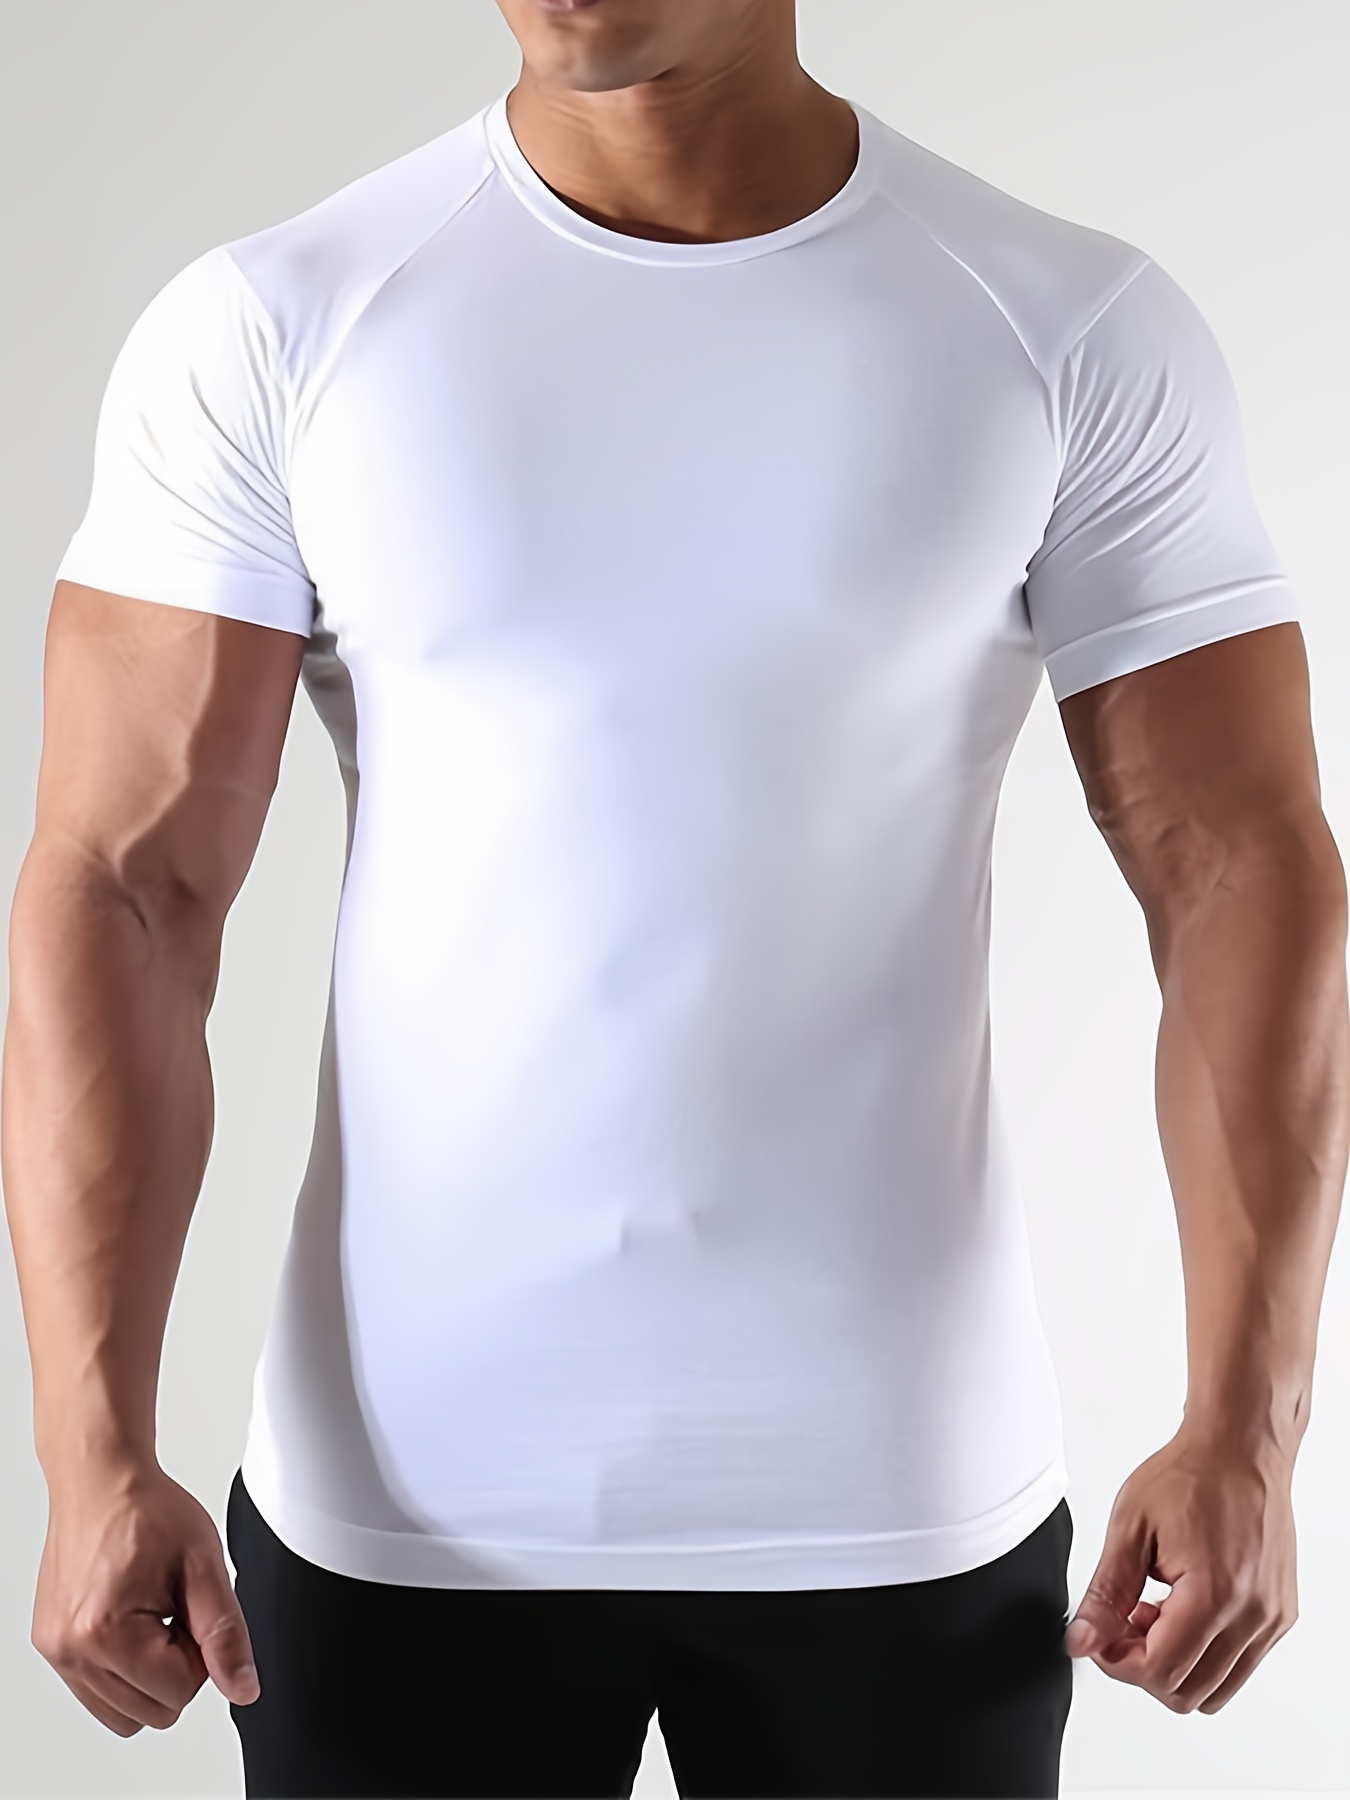 nsendm Mens Shirt Adult Male Shirt Short Sleeve T Shirt Mens Fashion Simple  Ice Silk Quick Drying Exercise Fitness Slim Round Our Most Comfortable T(Black,L)  